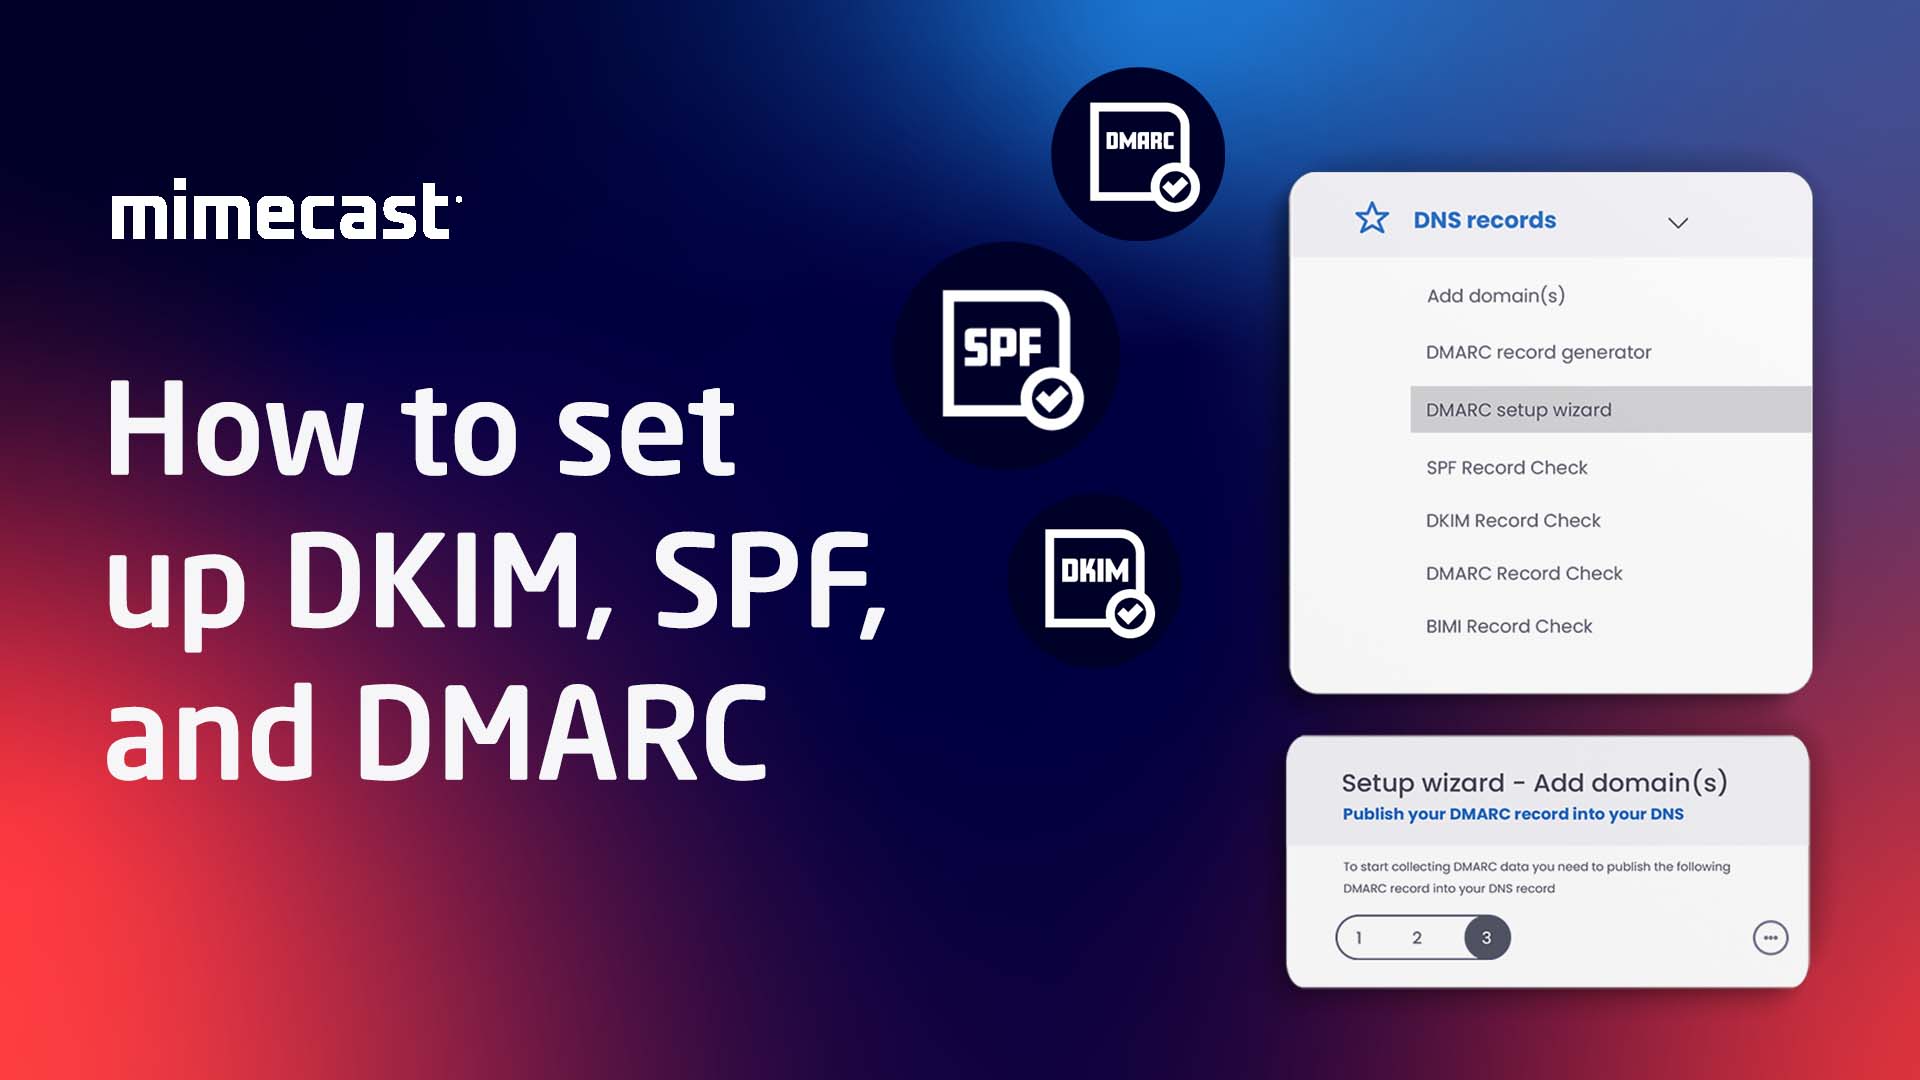 Mimecast guide on how to set up DKIM, SPF, and DMARC with icons for each and a screenshot showing DNS records setup options.